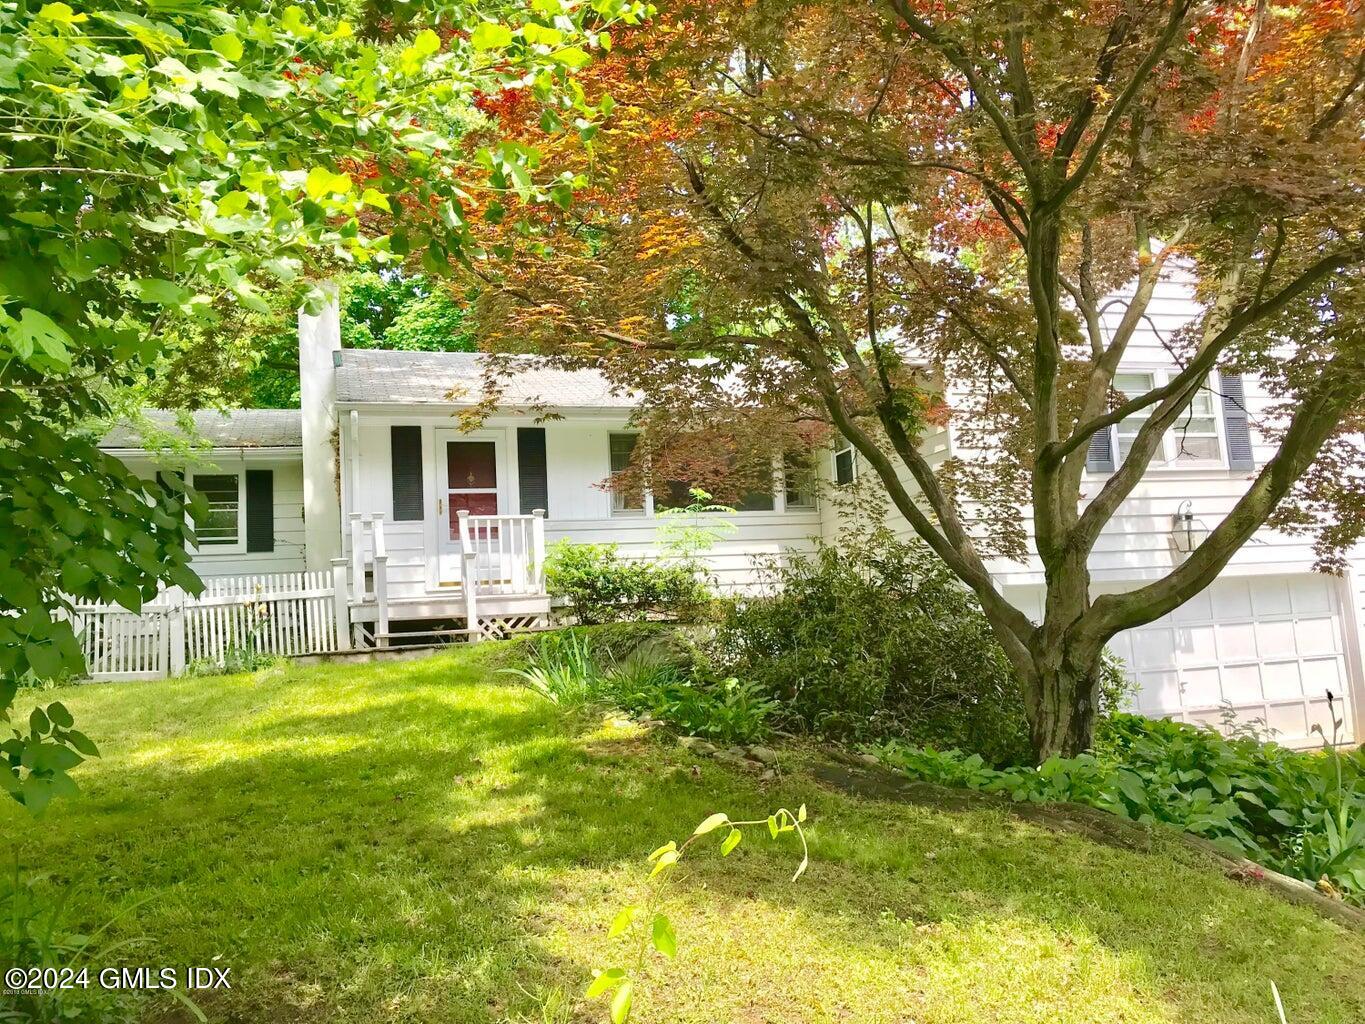 Rental Property at 22 Forest Avenue, Old Greenwich, Connecticut - Bedrooms: 3 
Bathrooms: 2  - $5,950 MO.